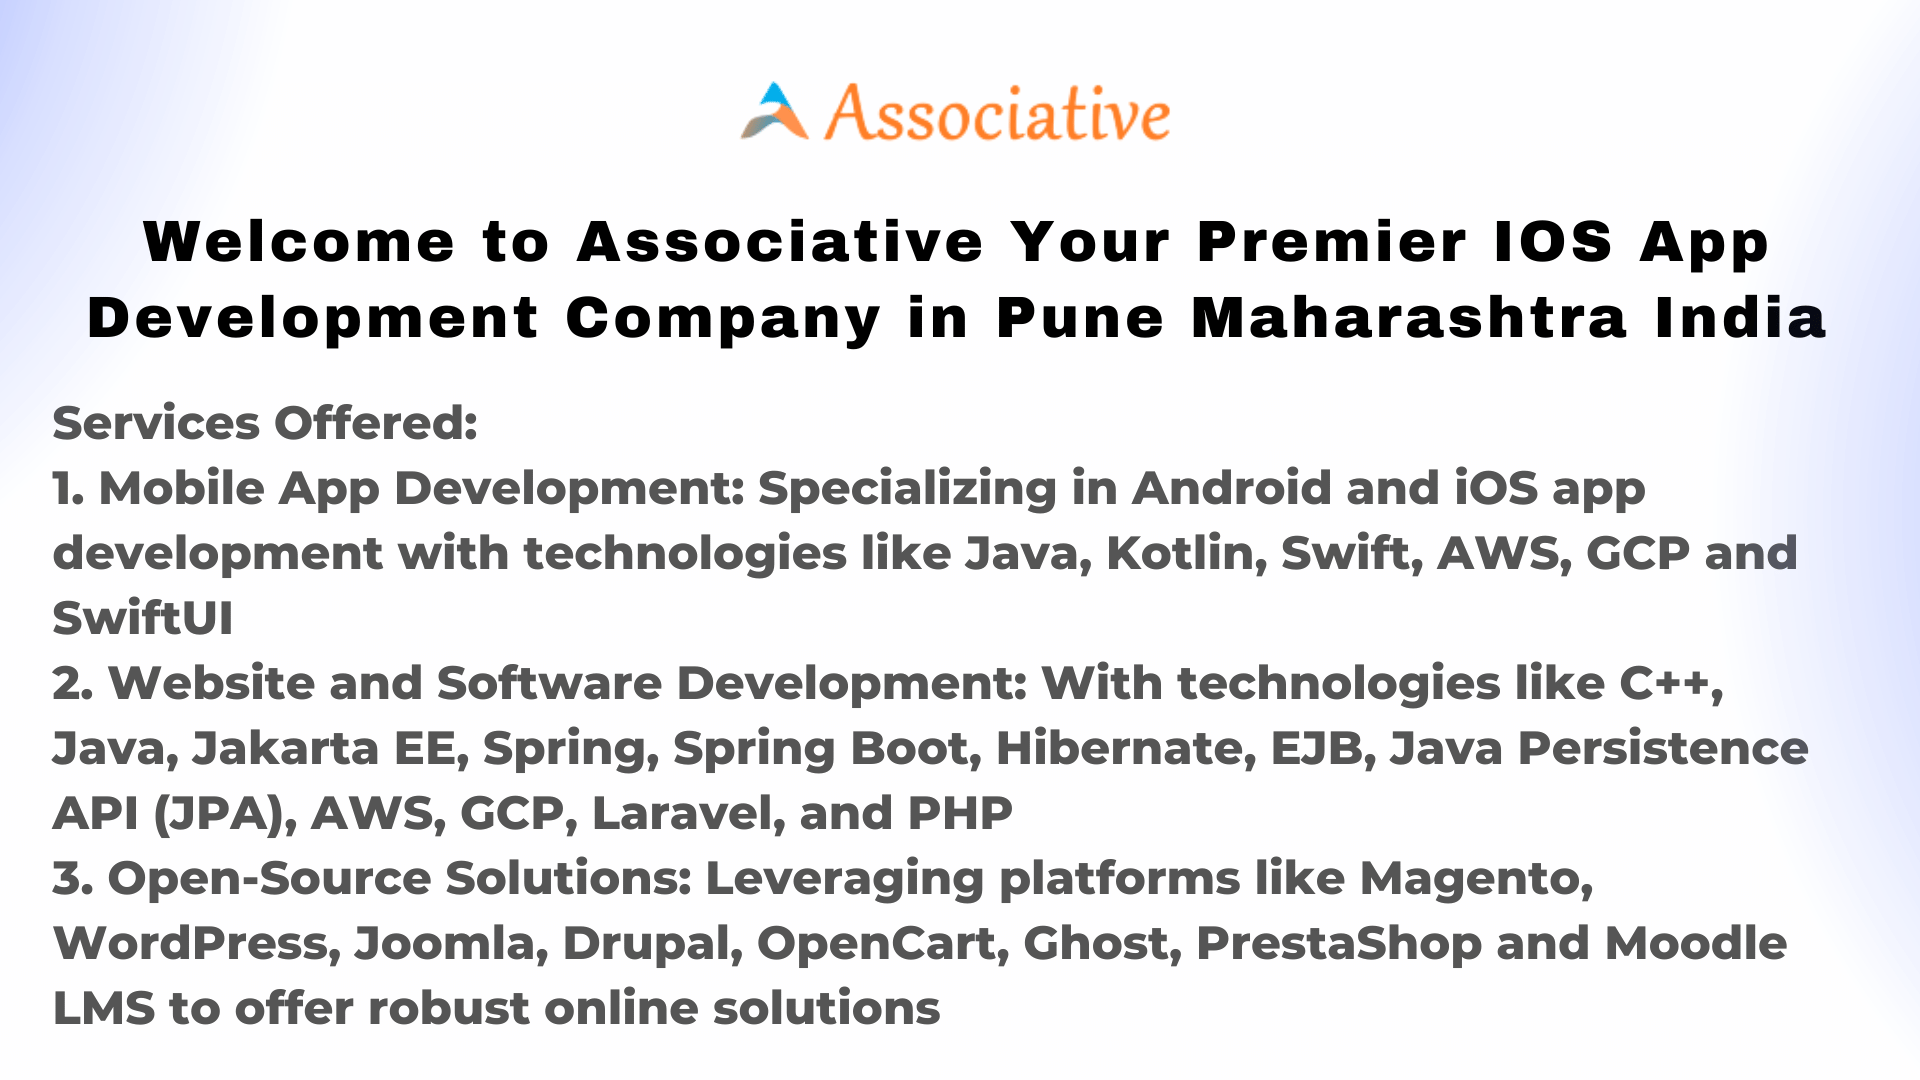 Welcome to Associative Your Premier iOS App Development Company in Pune Maharashtra India